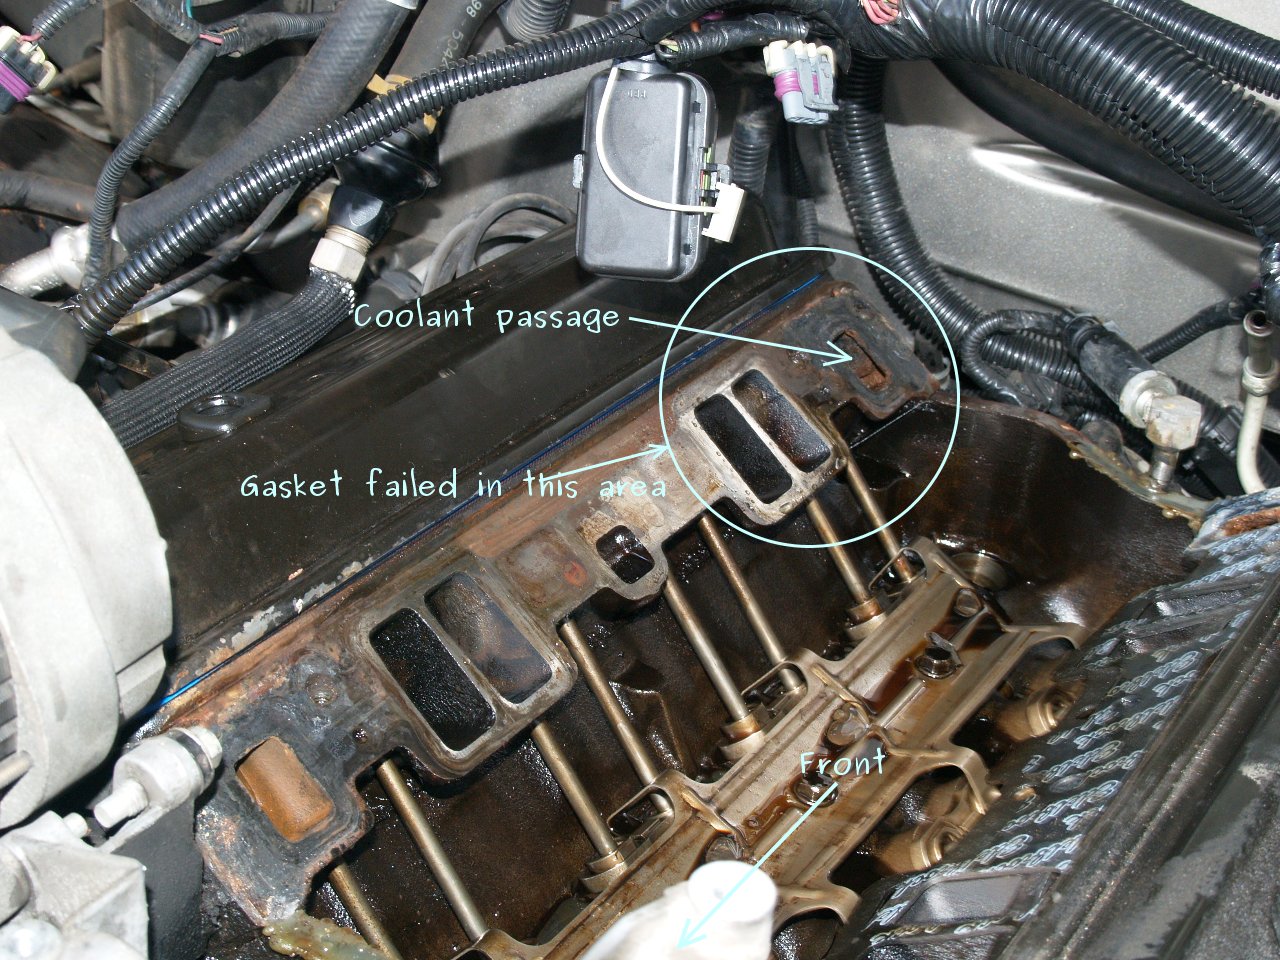 See P119E in engine